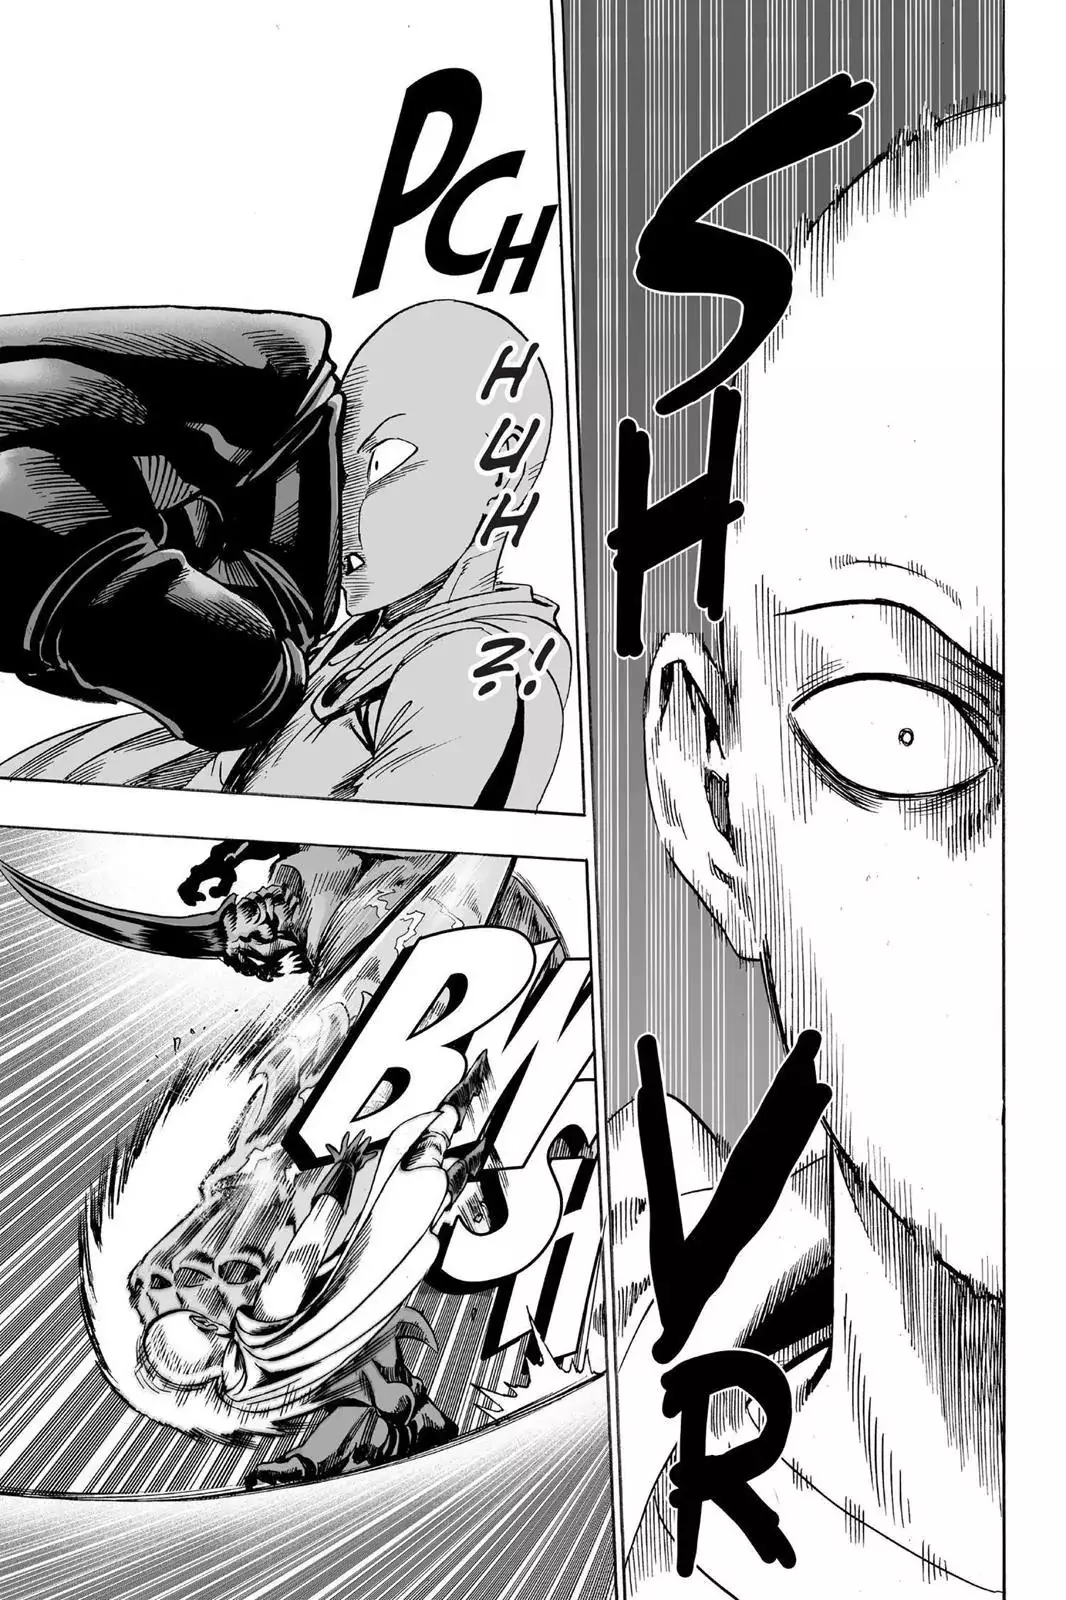 One Punch Man Chapter 11, READ One Punch Man Chapter 11 ONLINE, lost in the cloud genre,lost in the cloud gif,lost in the cloud girl,lost in the cloud goods,lost in the cloud goodreads,lost in the cloud,lost ark cloud gaming,lost odyssey cloud gaming,lost in the cloud fanart,lost in the cloud fanfic,lost in the cloud fandom,lost in the cloud first kiss,lost in the cloud font,lost in the cloud ending,lost in the cloud episode 97,lost in the cloud edit,lost in the cloud explained,lost in the cloud dog,lost in the cloud discord server,lost in the cloud desktop wallpaper,lost in the cloud drawing,can't find my cloud on network,lost in the cloud characters,lost in the cloud chapter 93 release date,lost in the cloud birthday,lost in the cloud birthday art,lost in the cloud background,lost in the cloud banner,lost in the clouds meaning,what is the black cloud in lost,lost in the cloud ao3,lost in the cloud anime,lost in the cloud art,lost in the cloud author twitter,lost in the cloud author instagram,lost in the cloud artist,lost in the cloud acrylic stand,lost in the cloud artist twitter,lost in the cloud art style,lost in the cloud analysis